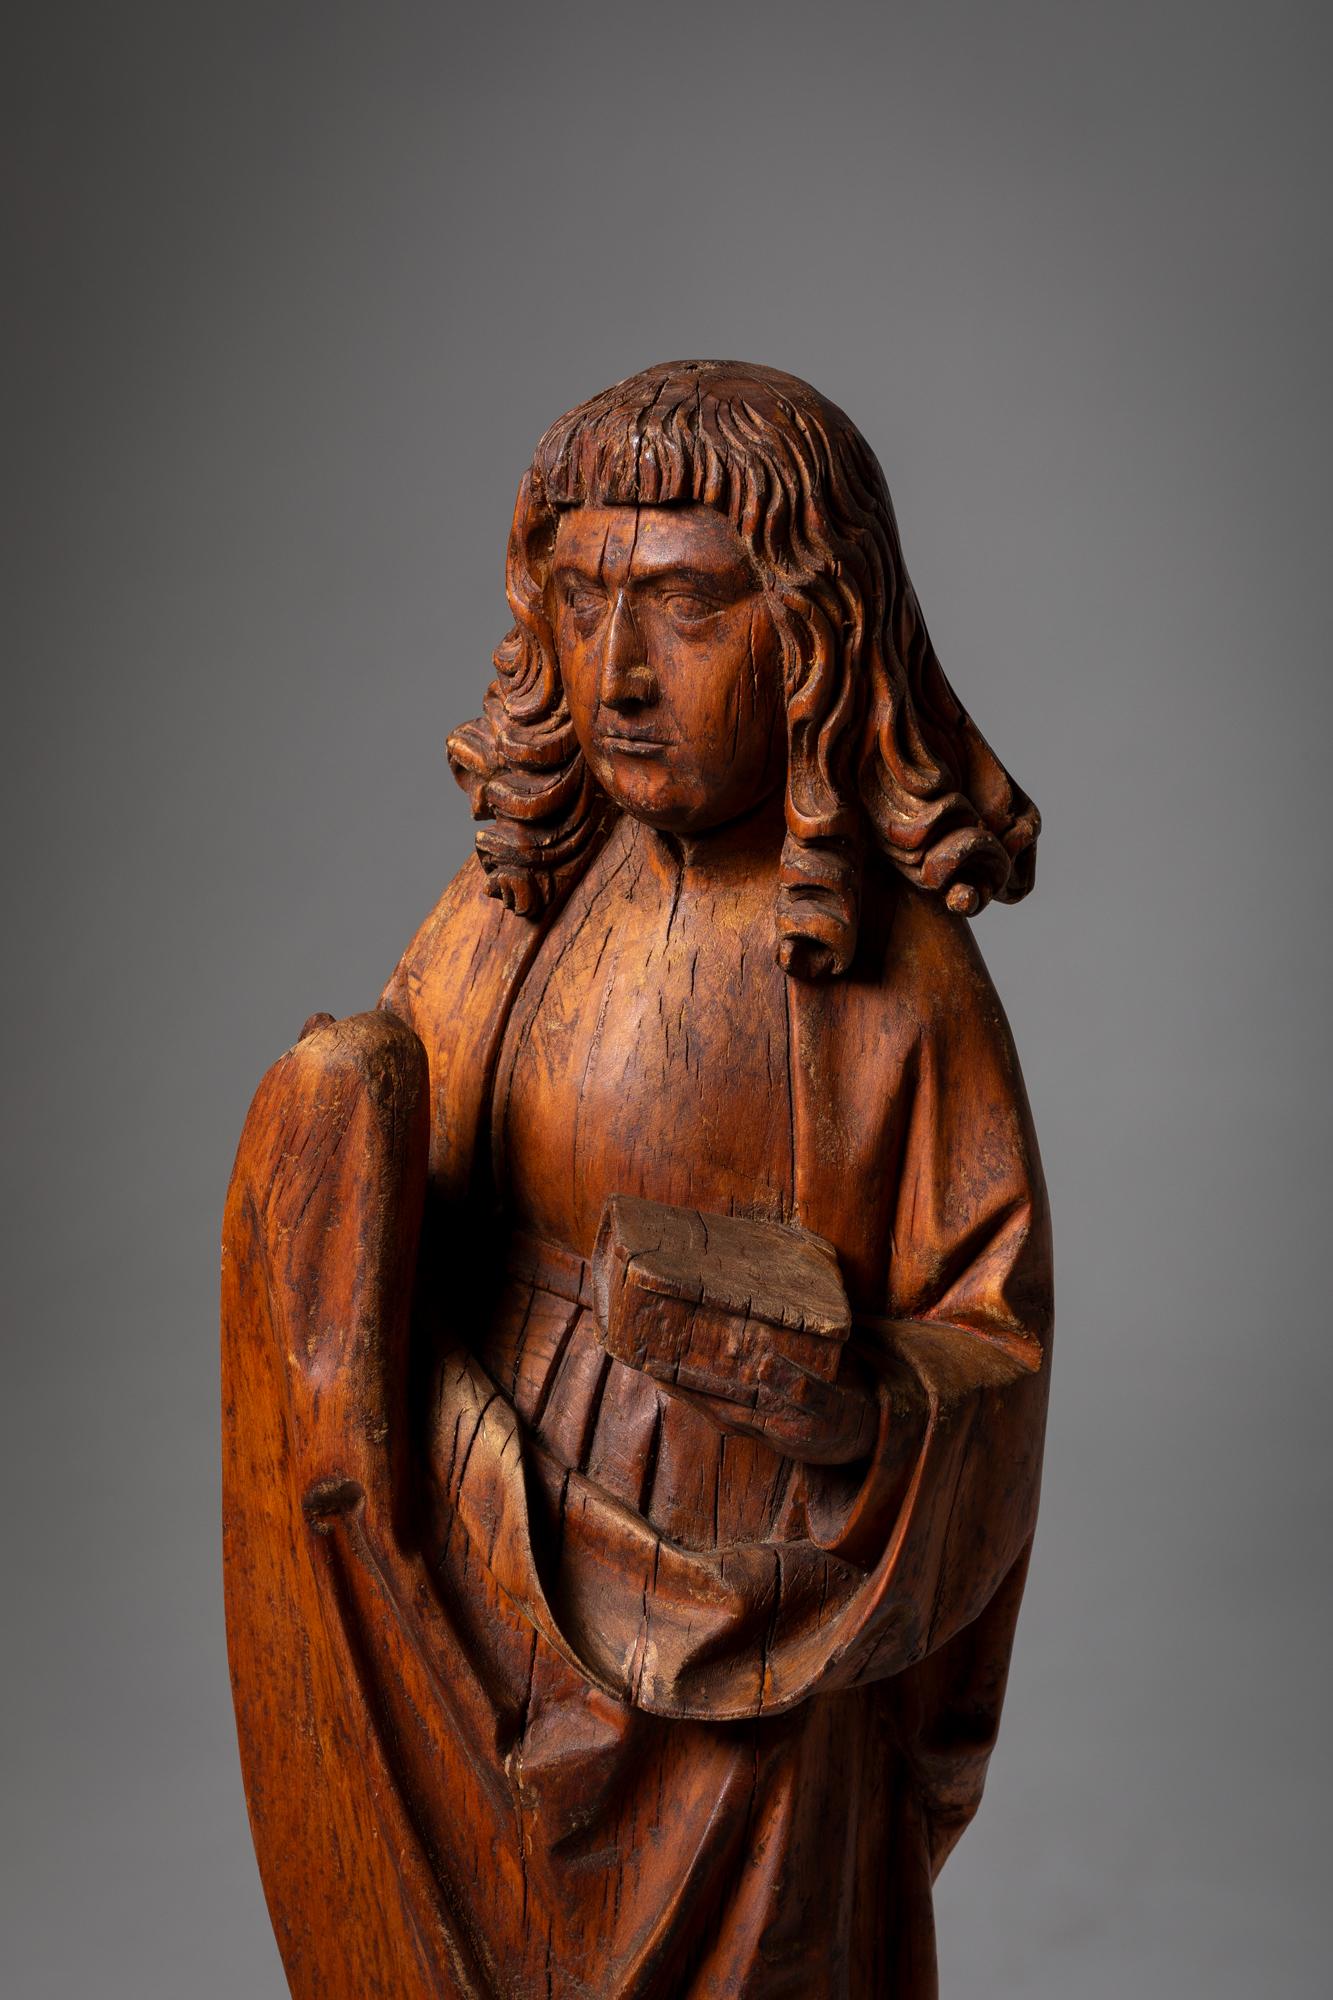 We present you these two icons Virgin Mary and Saint John, pair of linden wood sculptures. Bologna 15th century.
The Caloust Gulbenkian Foundation in Lisbon, Portugal museum has an identical pair on display.
